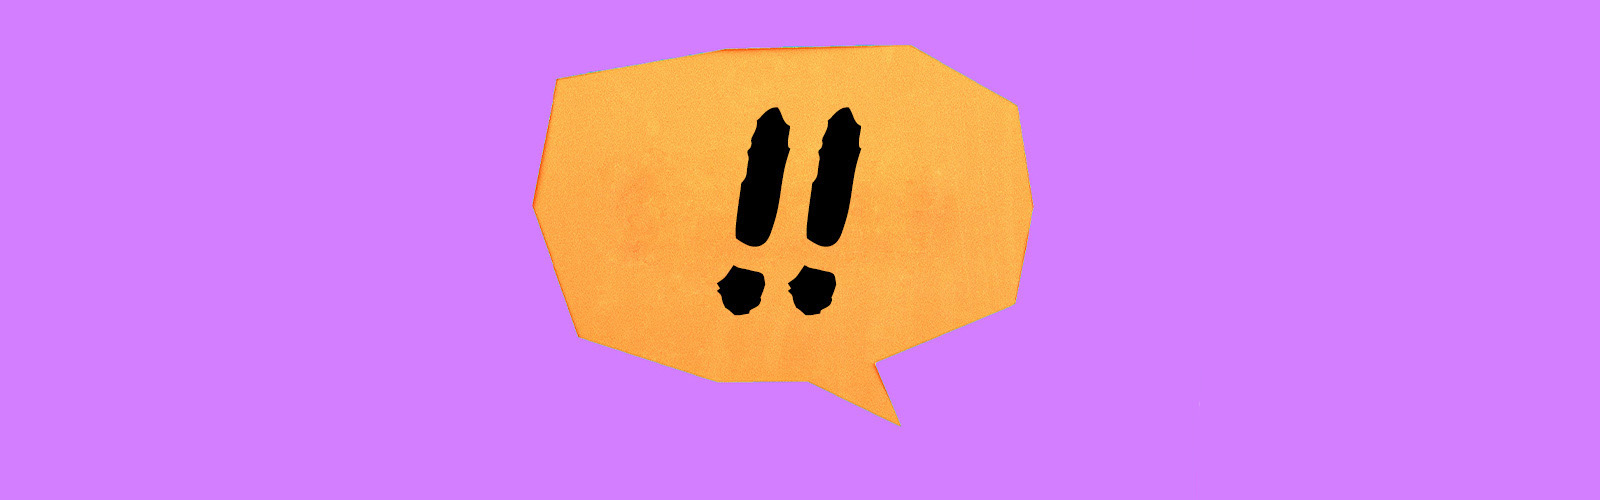 A cut of an orange speak bubble on a purple background with exclamation points in the center.